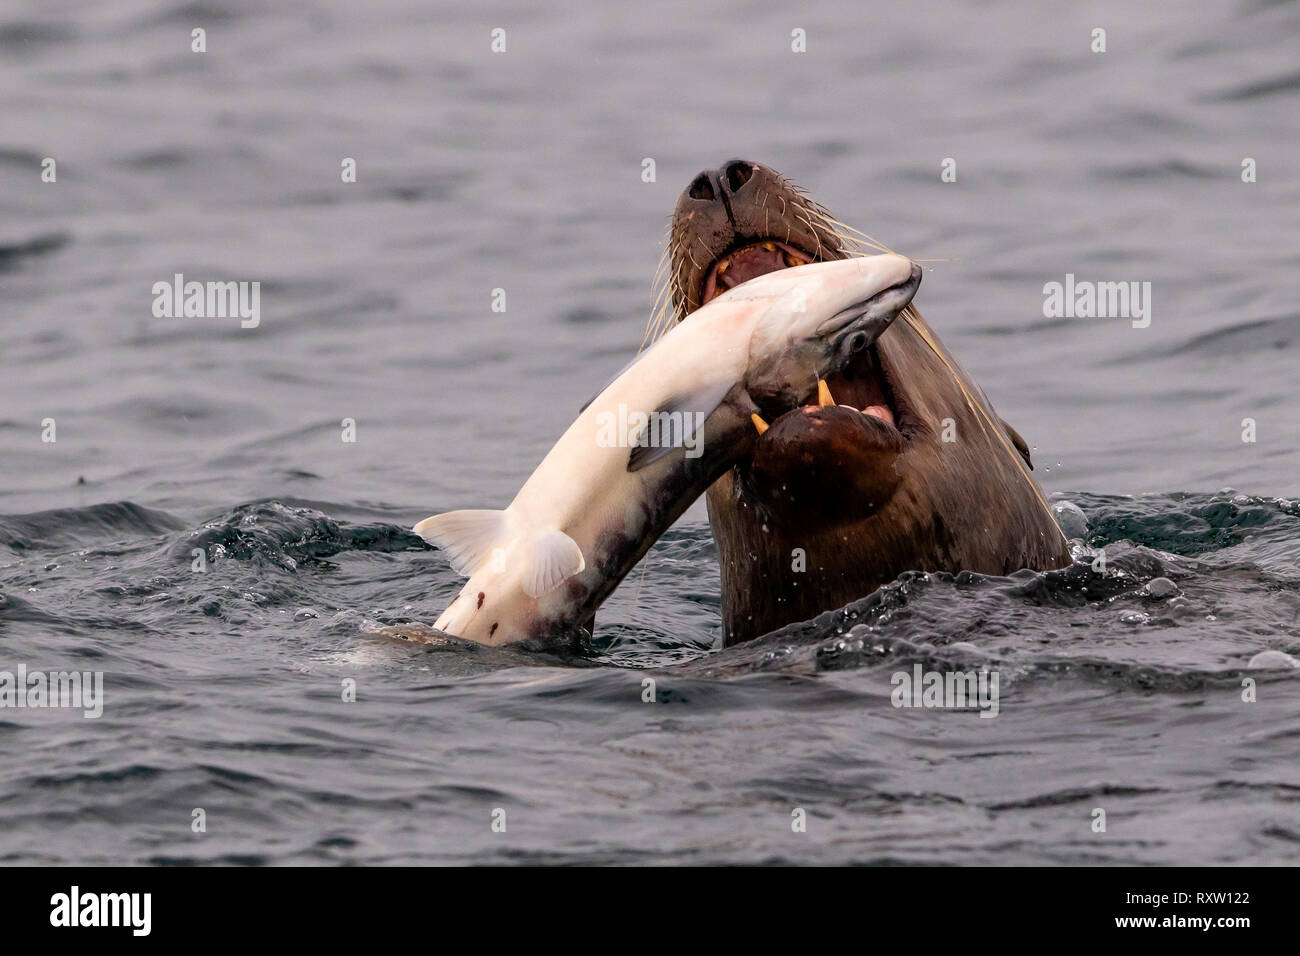 A large Steller sea lion cathcing and eating a fresh caught wild salmon in the Broughton Archipelago, First Nations Territory, British Columbia, Canada Stock Photo